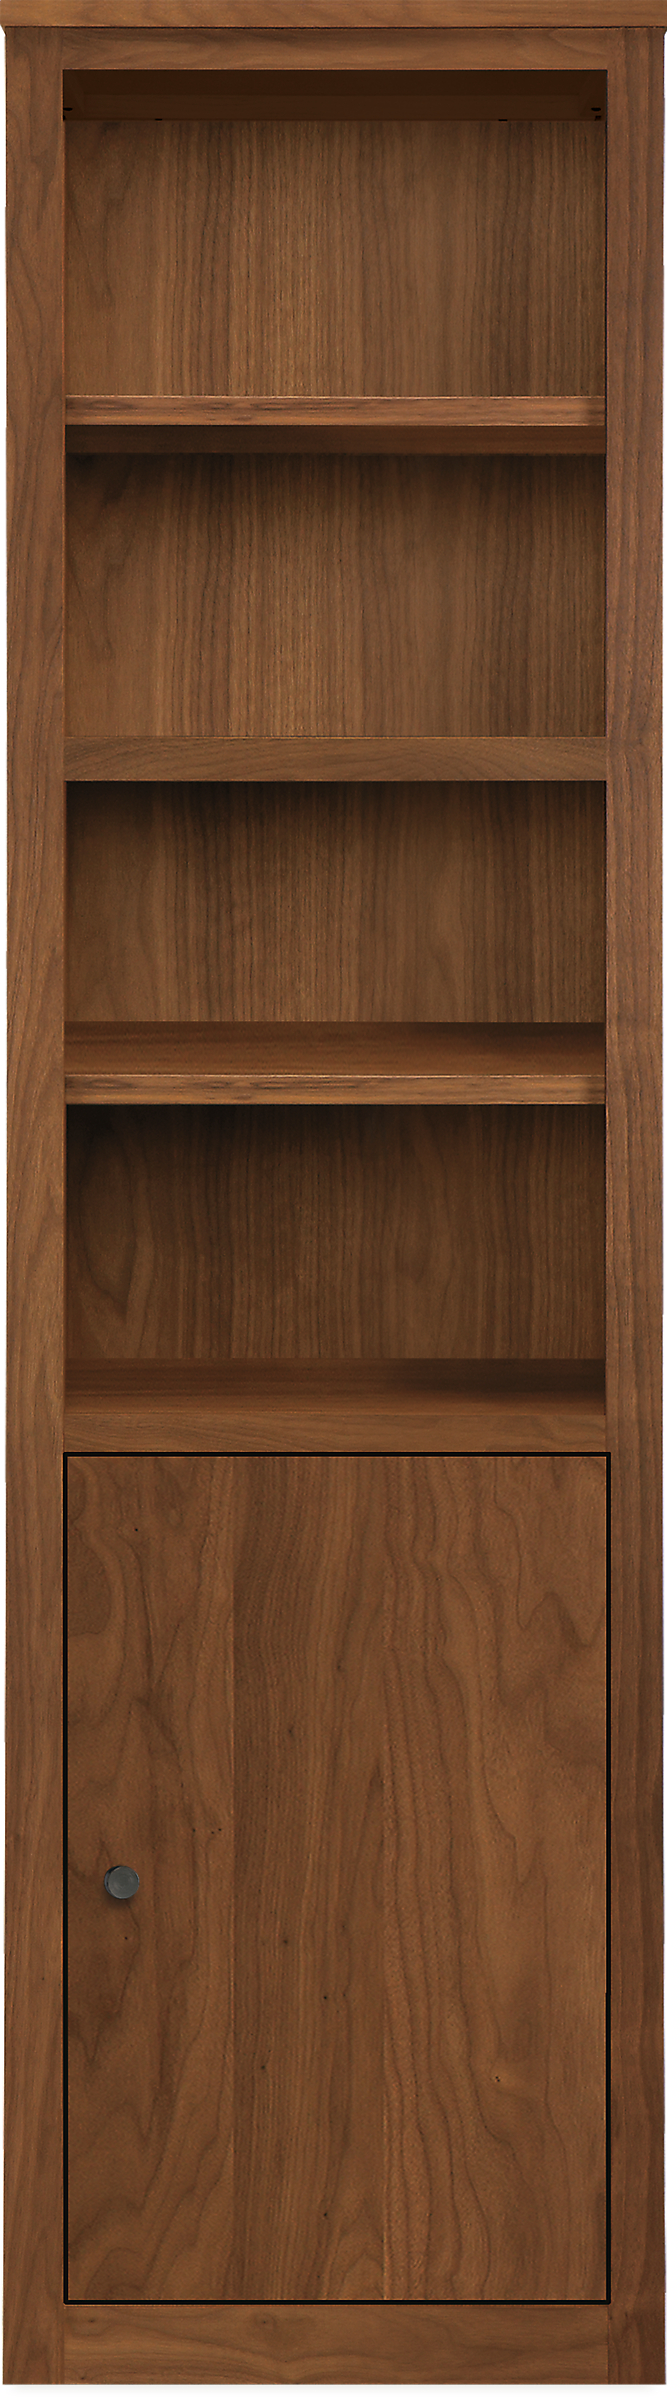 Woodwind 20w 12d 72h Bookcase with Right Door in Walnut with Natural Steel